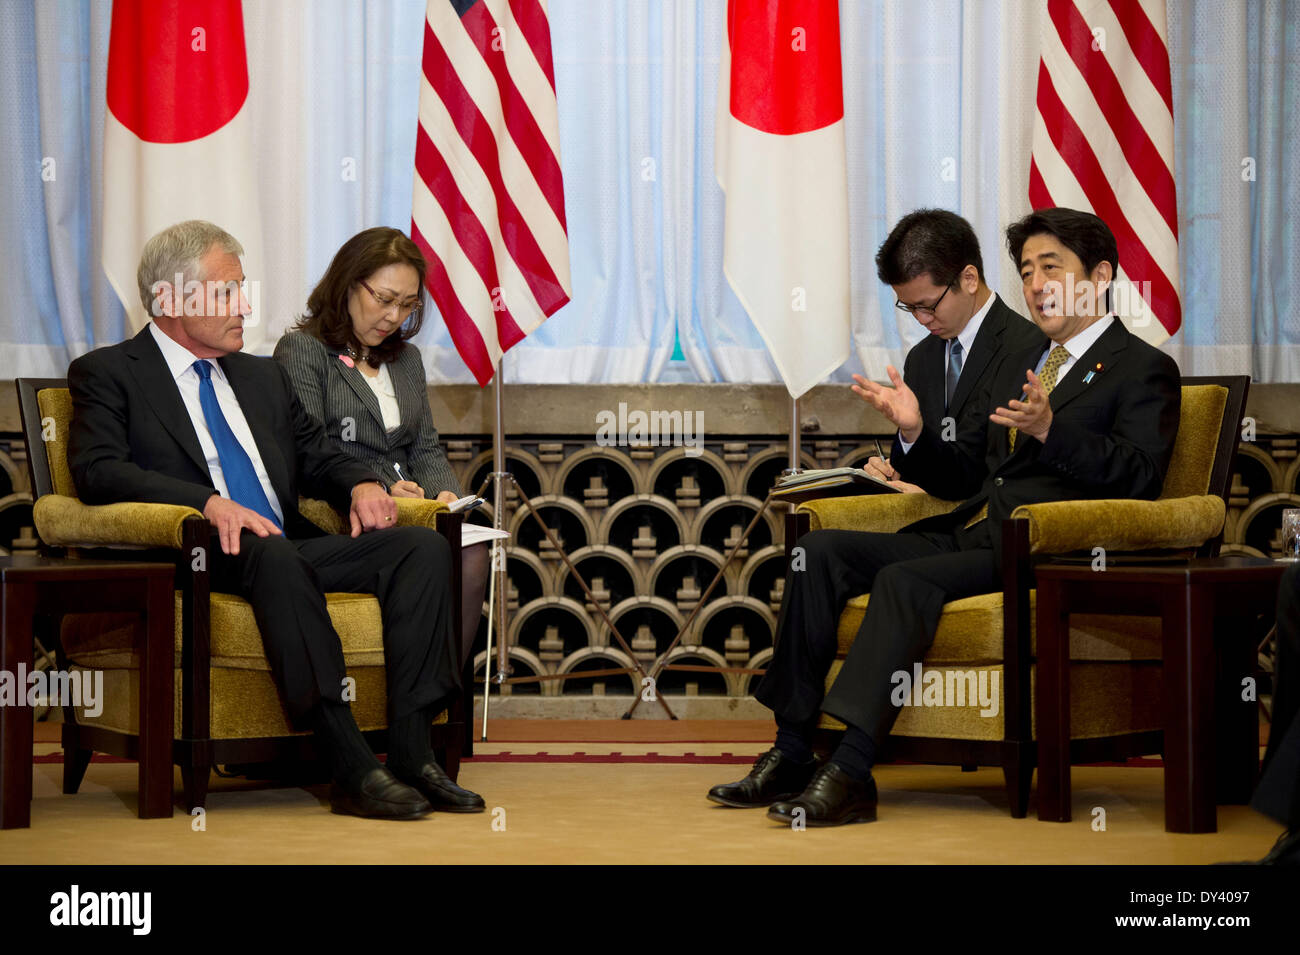 US Secretary of Defense Chuck Hagel meets with Japanese Prime Minister Shinzo Abe at the Prime Ministers official residence Sori Daijin Kantei April 5, 2014 in Tokyo, Japan. Hagel announced the deployment of drones and missile destroyers to bolster US-Japan defense alliance. Stock Photo